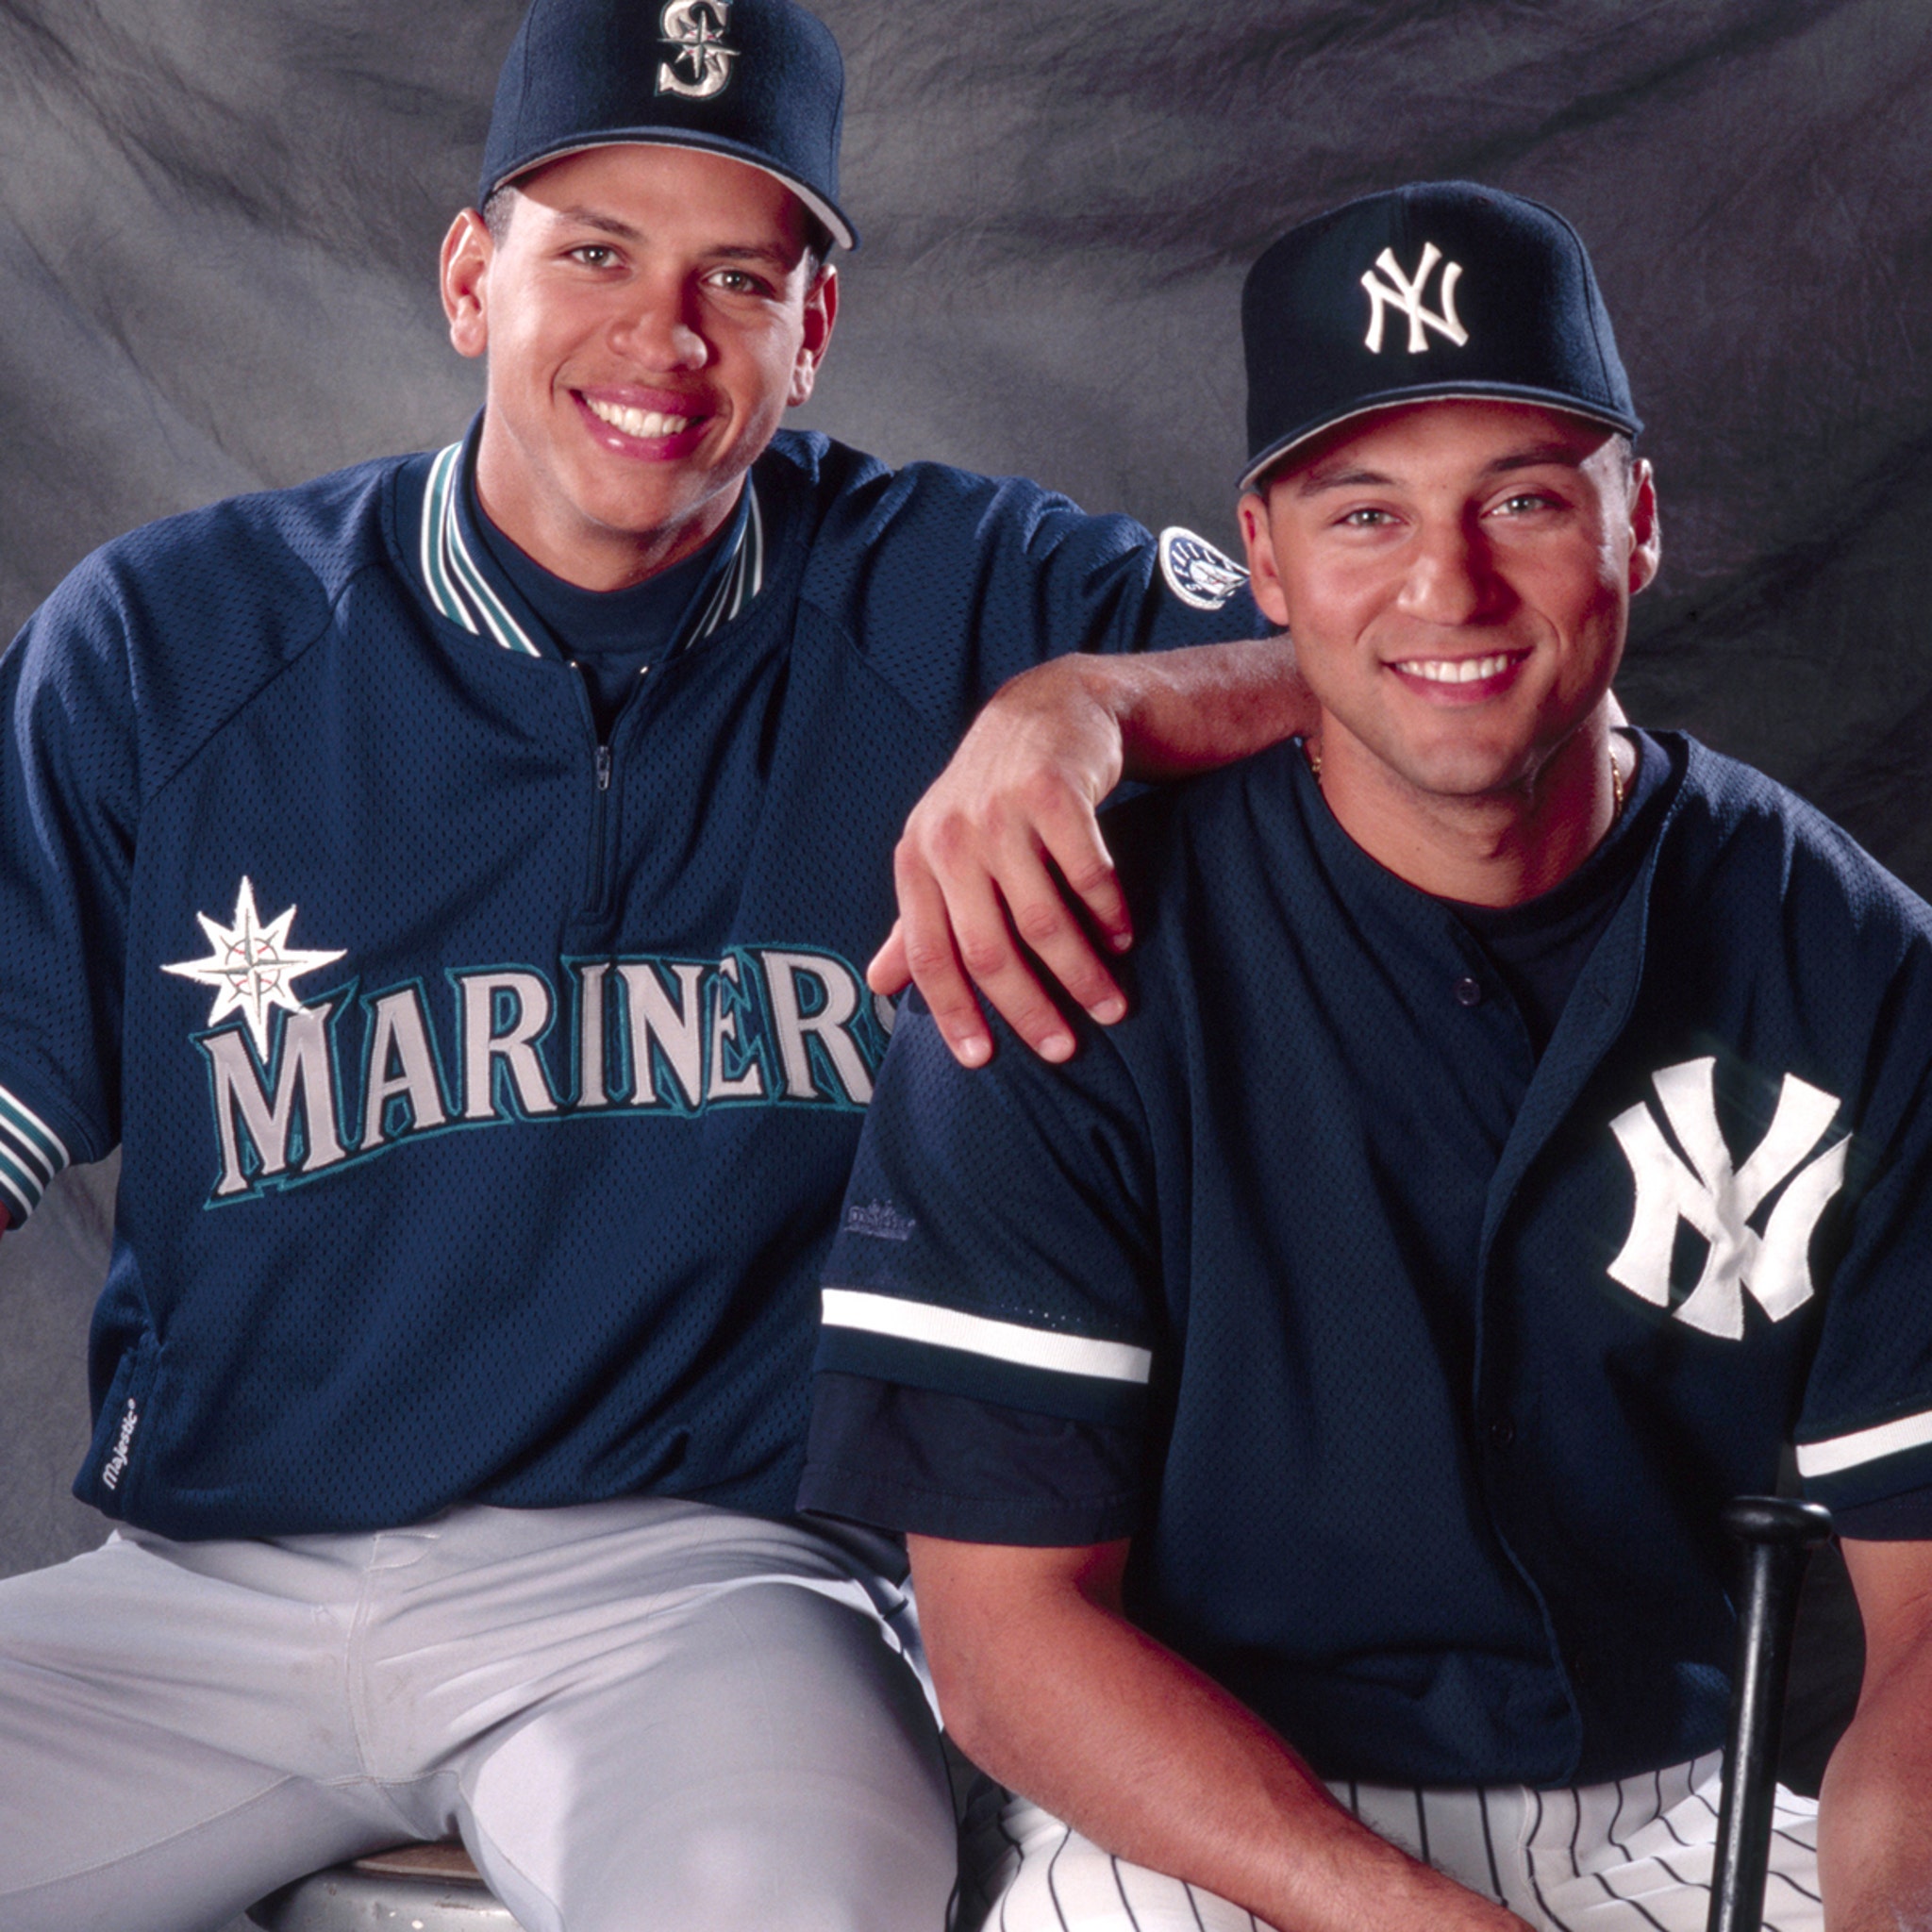 New York Yankees Alex Rodriguez and Derek Jeter (R) stand in the